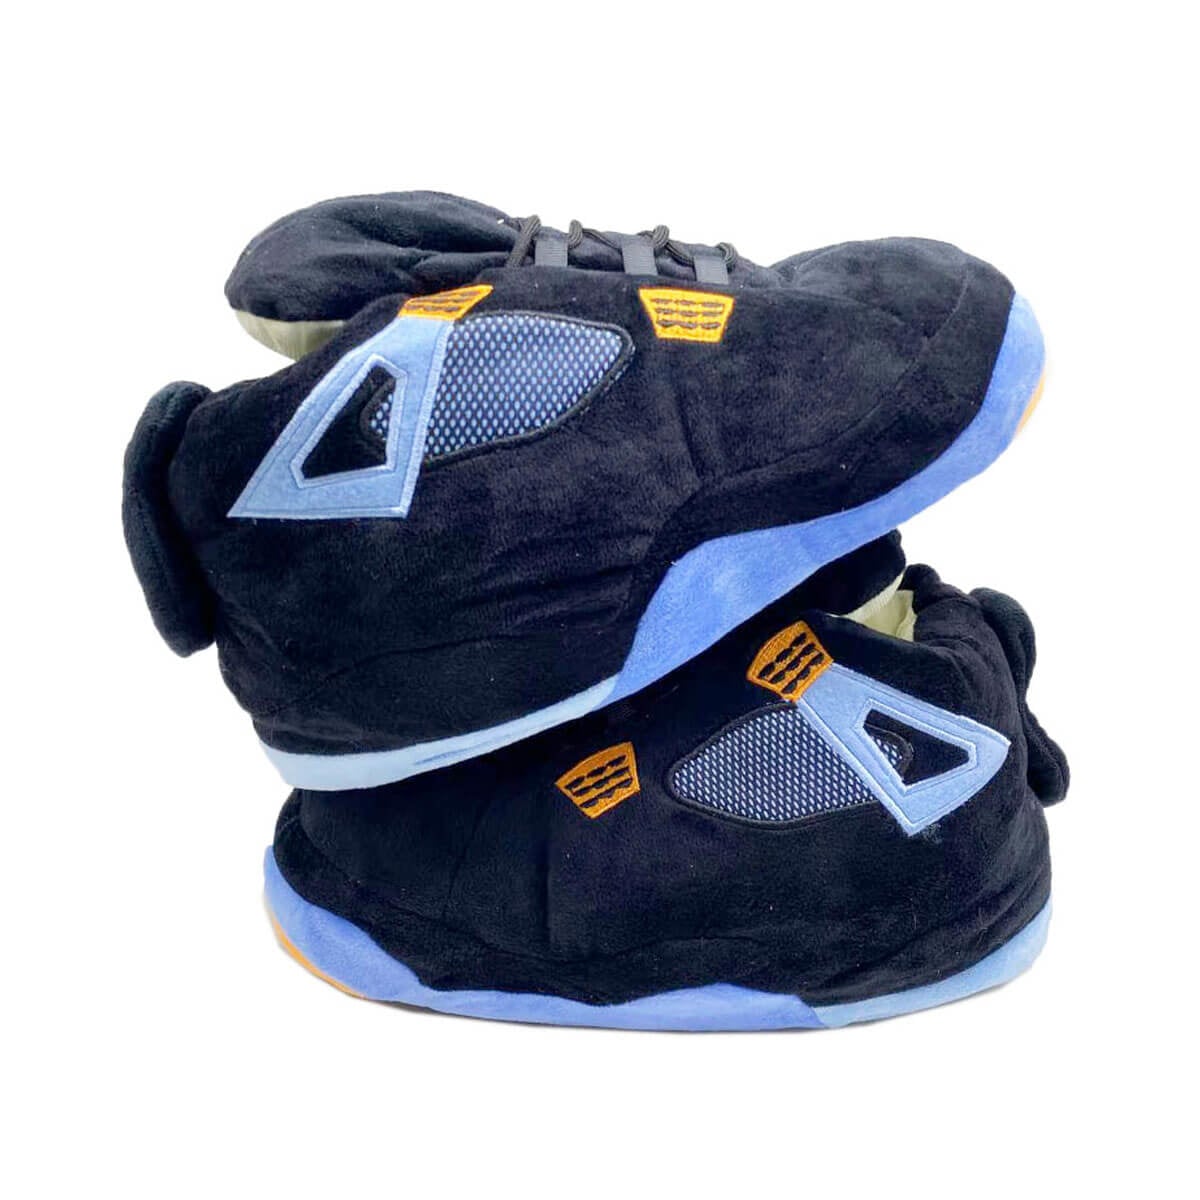 Sneakers Warm Home Fashion Slippers Unisex Couple Sliders Part 4